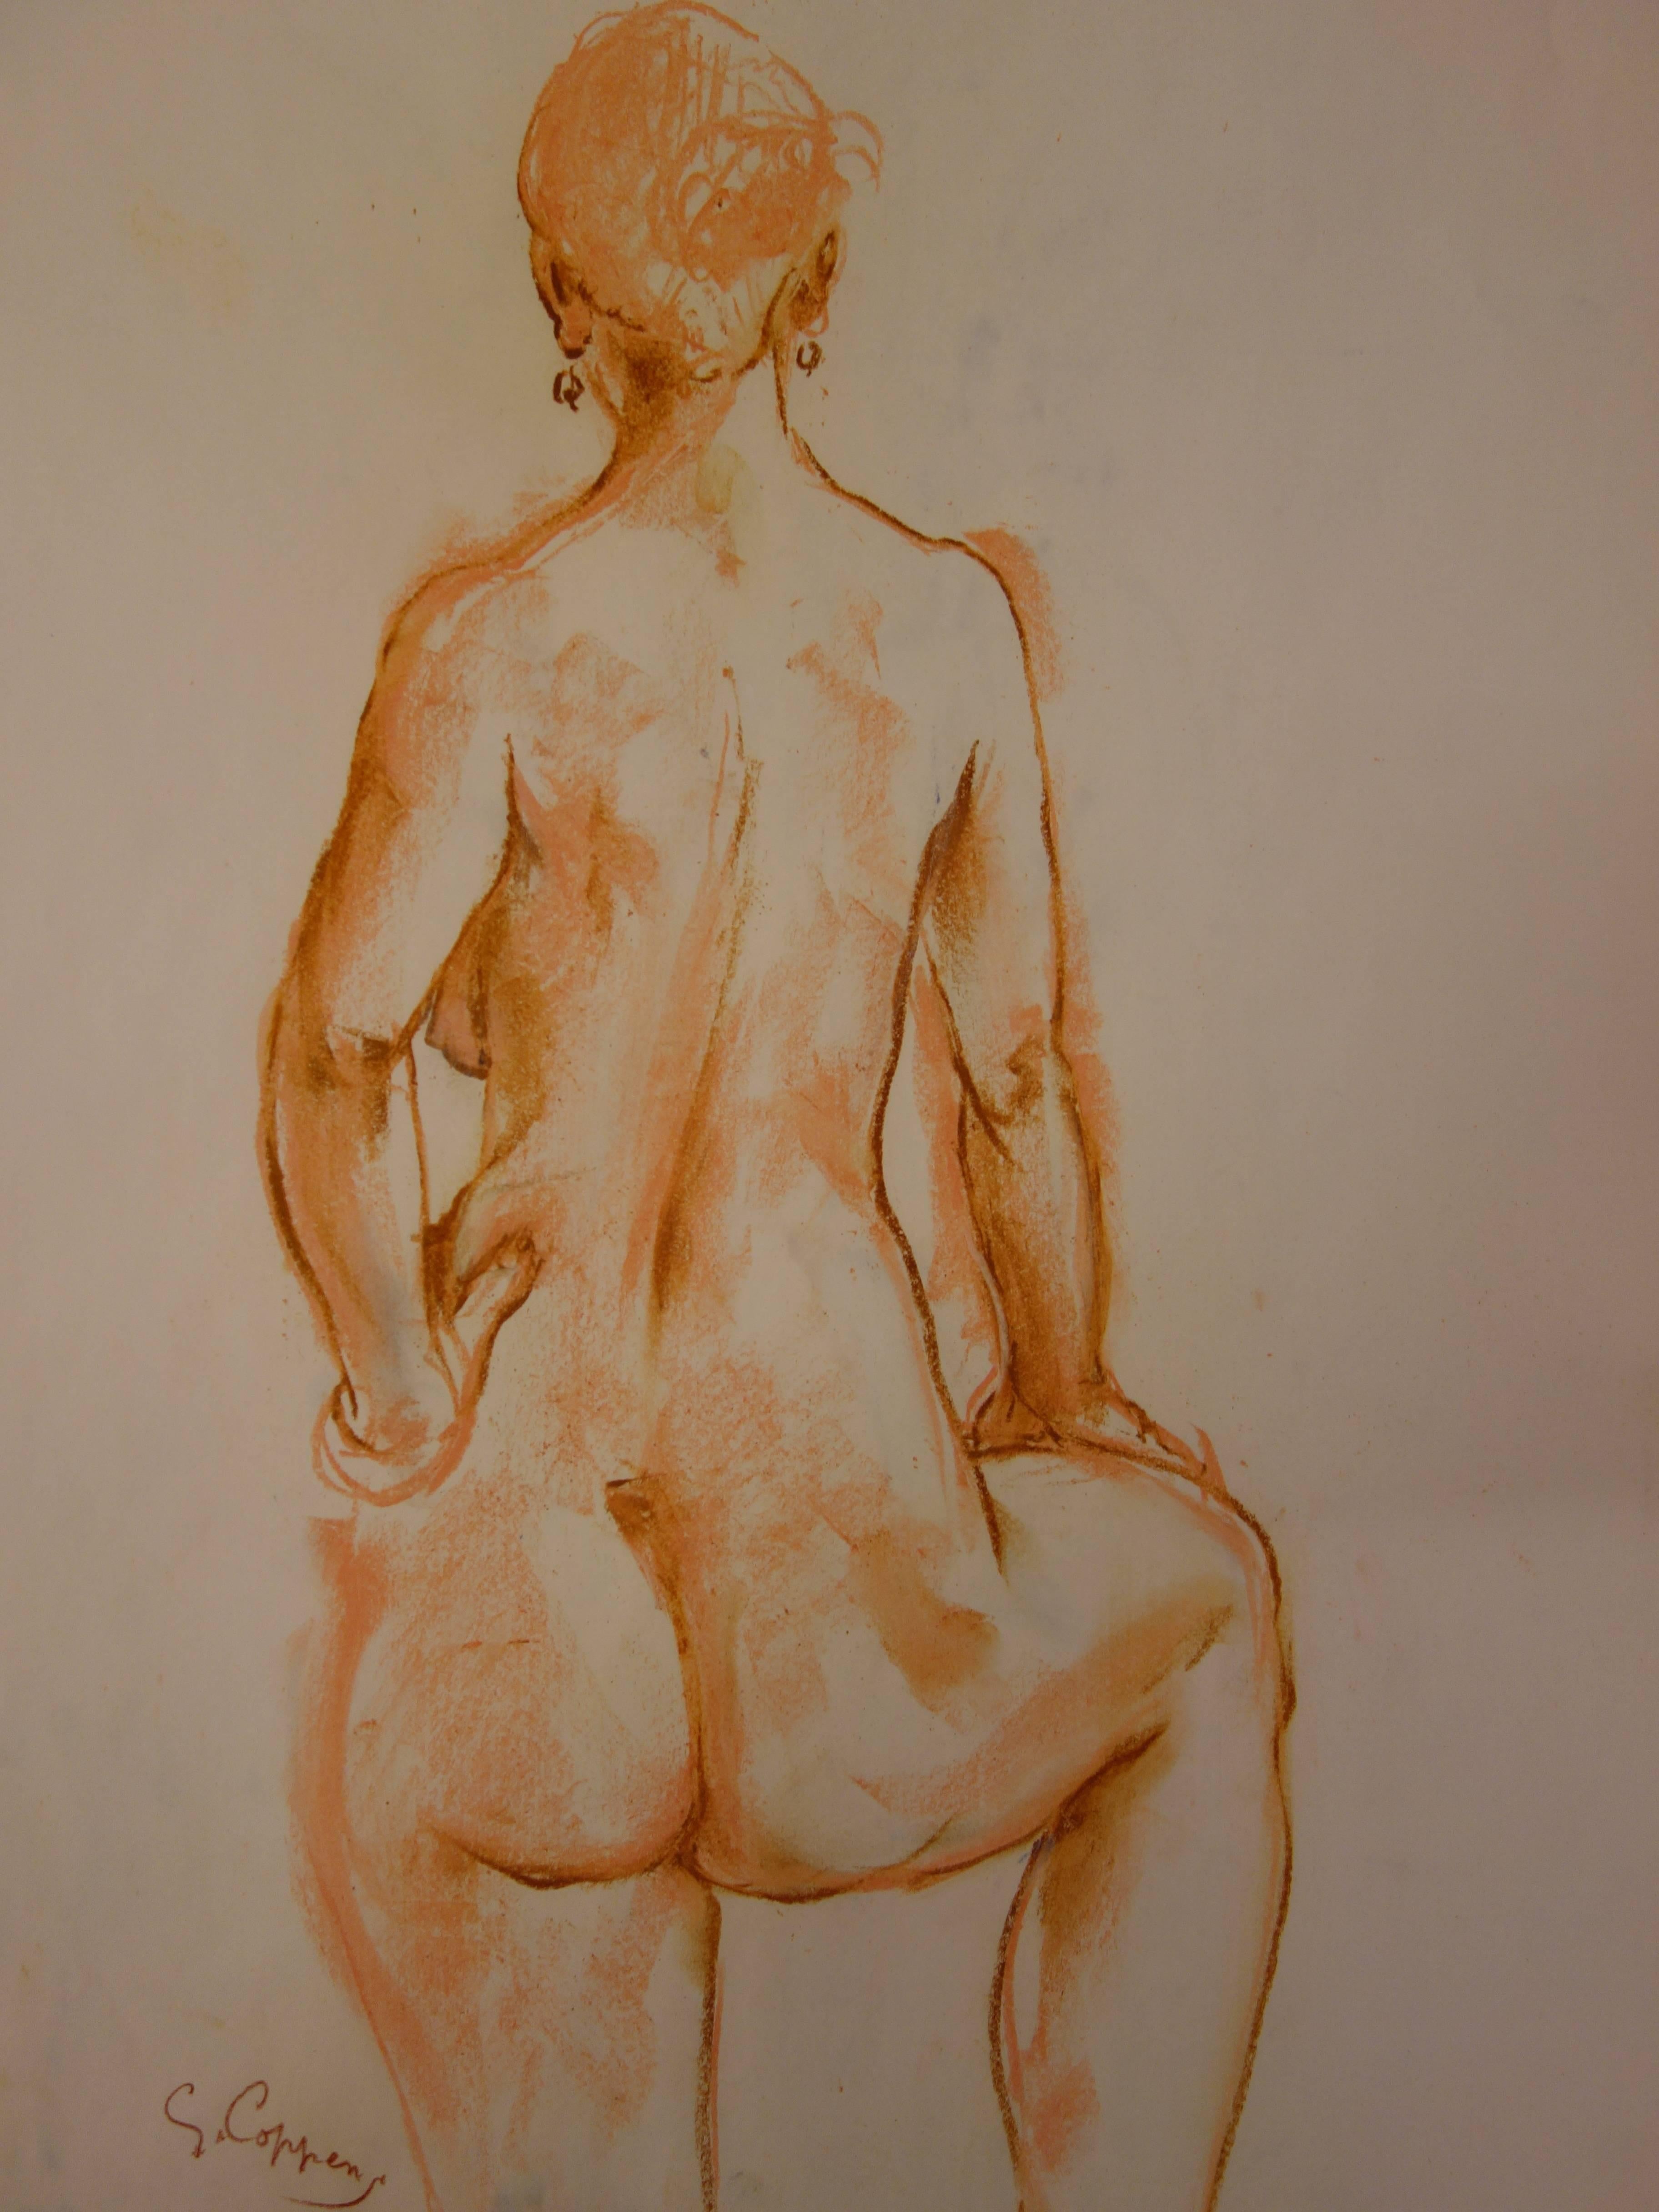 Gaston COPPENS (1909 - 2002)
Study for a Standing Nude Sculpture

Original charcoal drawing
Signed in the bottom left
Stamp of the artist on the back
On drawing paper 52 x 43 cm (c 21 x 17 inch)

Excellent condition

Gaston Coppens studied sculpture